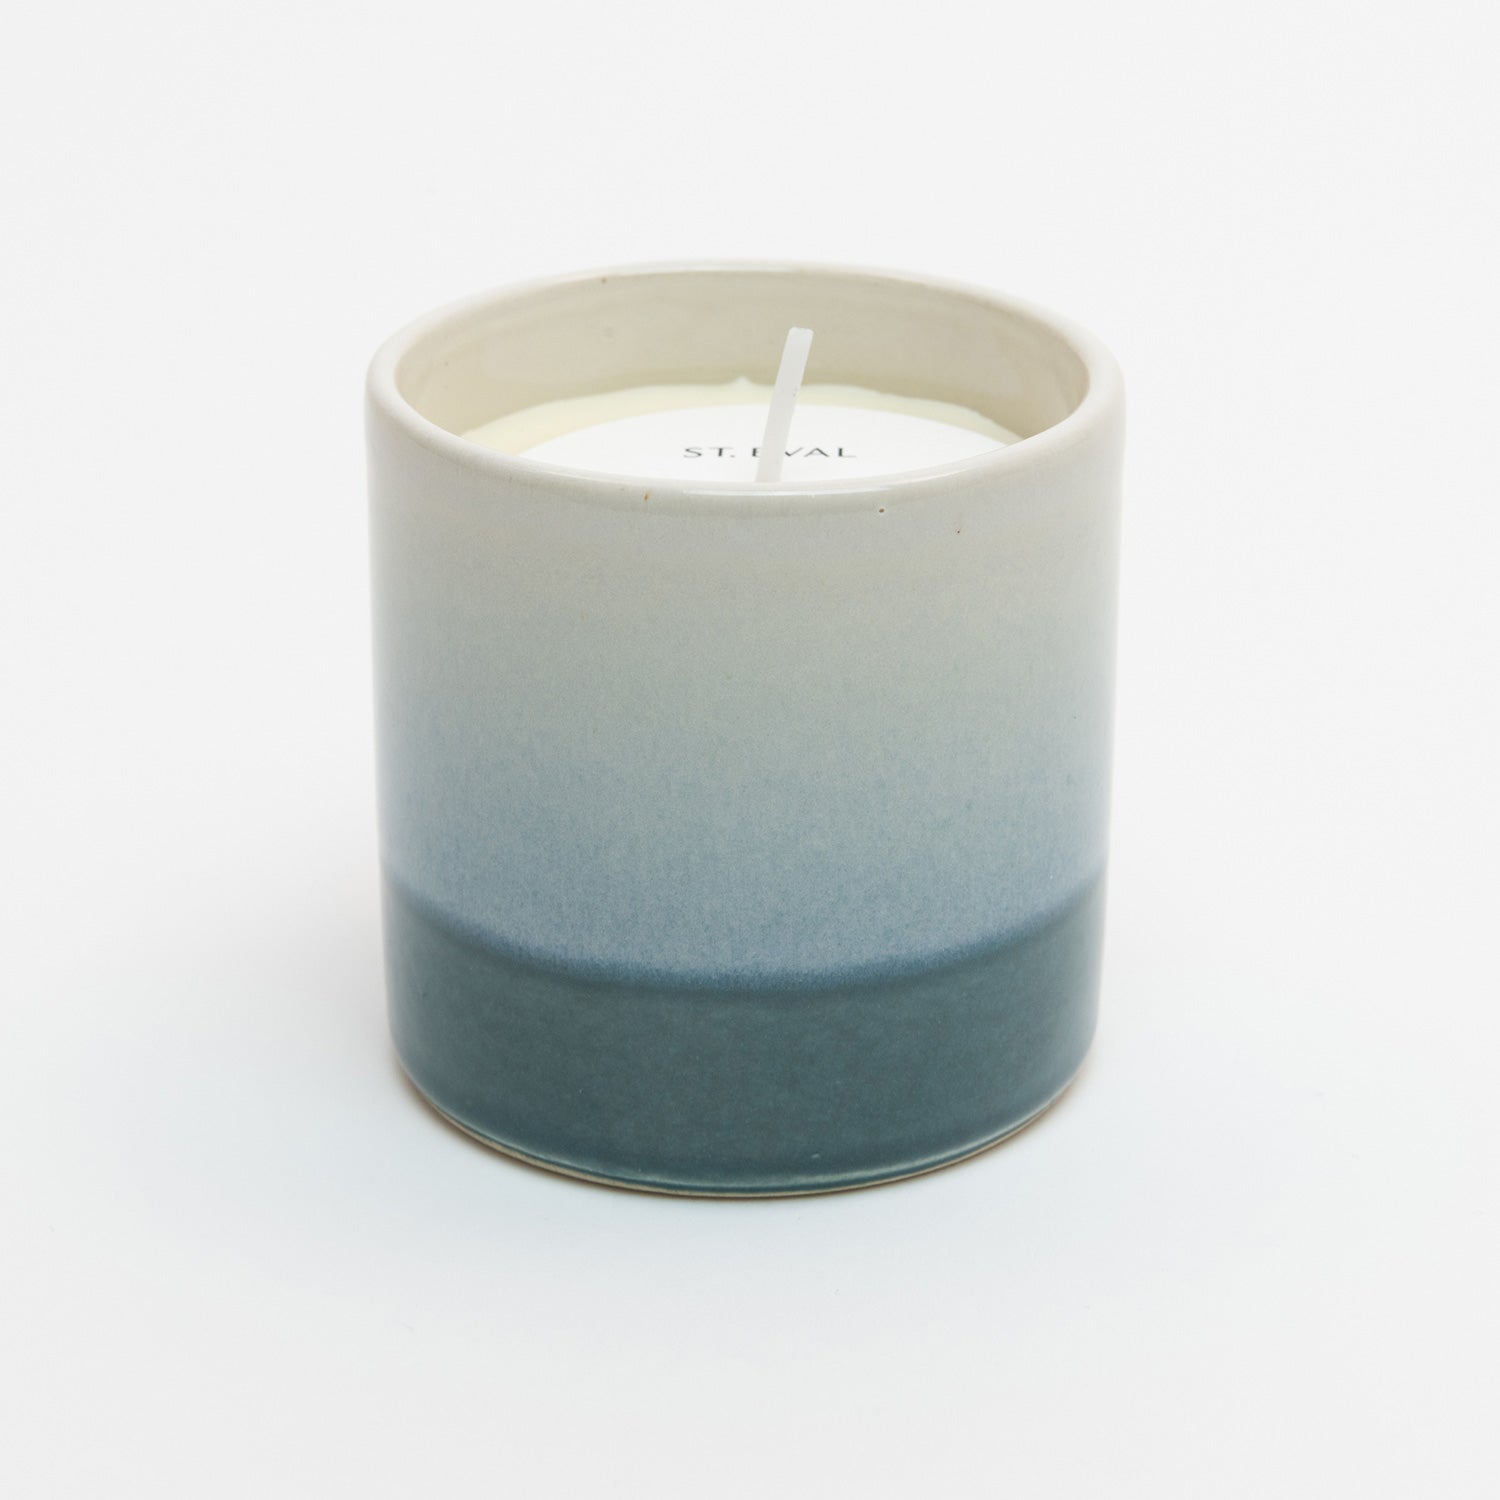 St Eval Sea & Shore Fig candle pot. Stoneware ceramic pot. Cream top fading to teal blue ring at base. St Eval card circle protector on top of candle with wick standing tall.